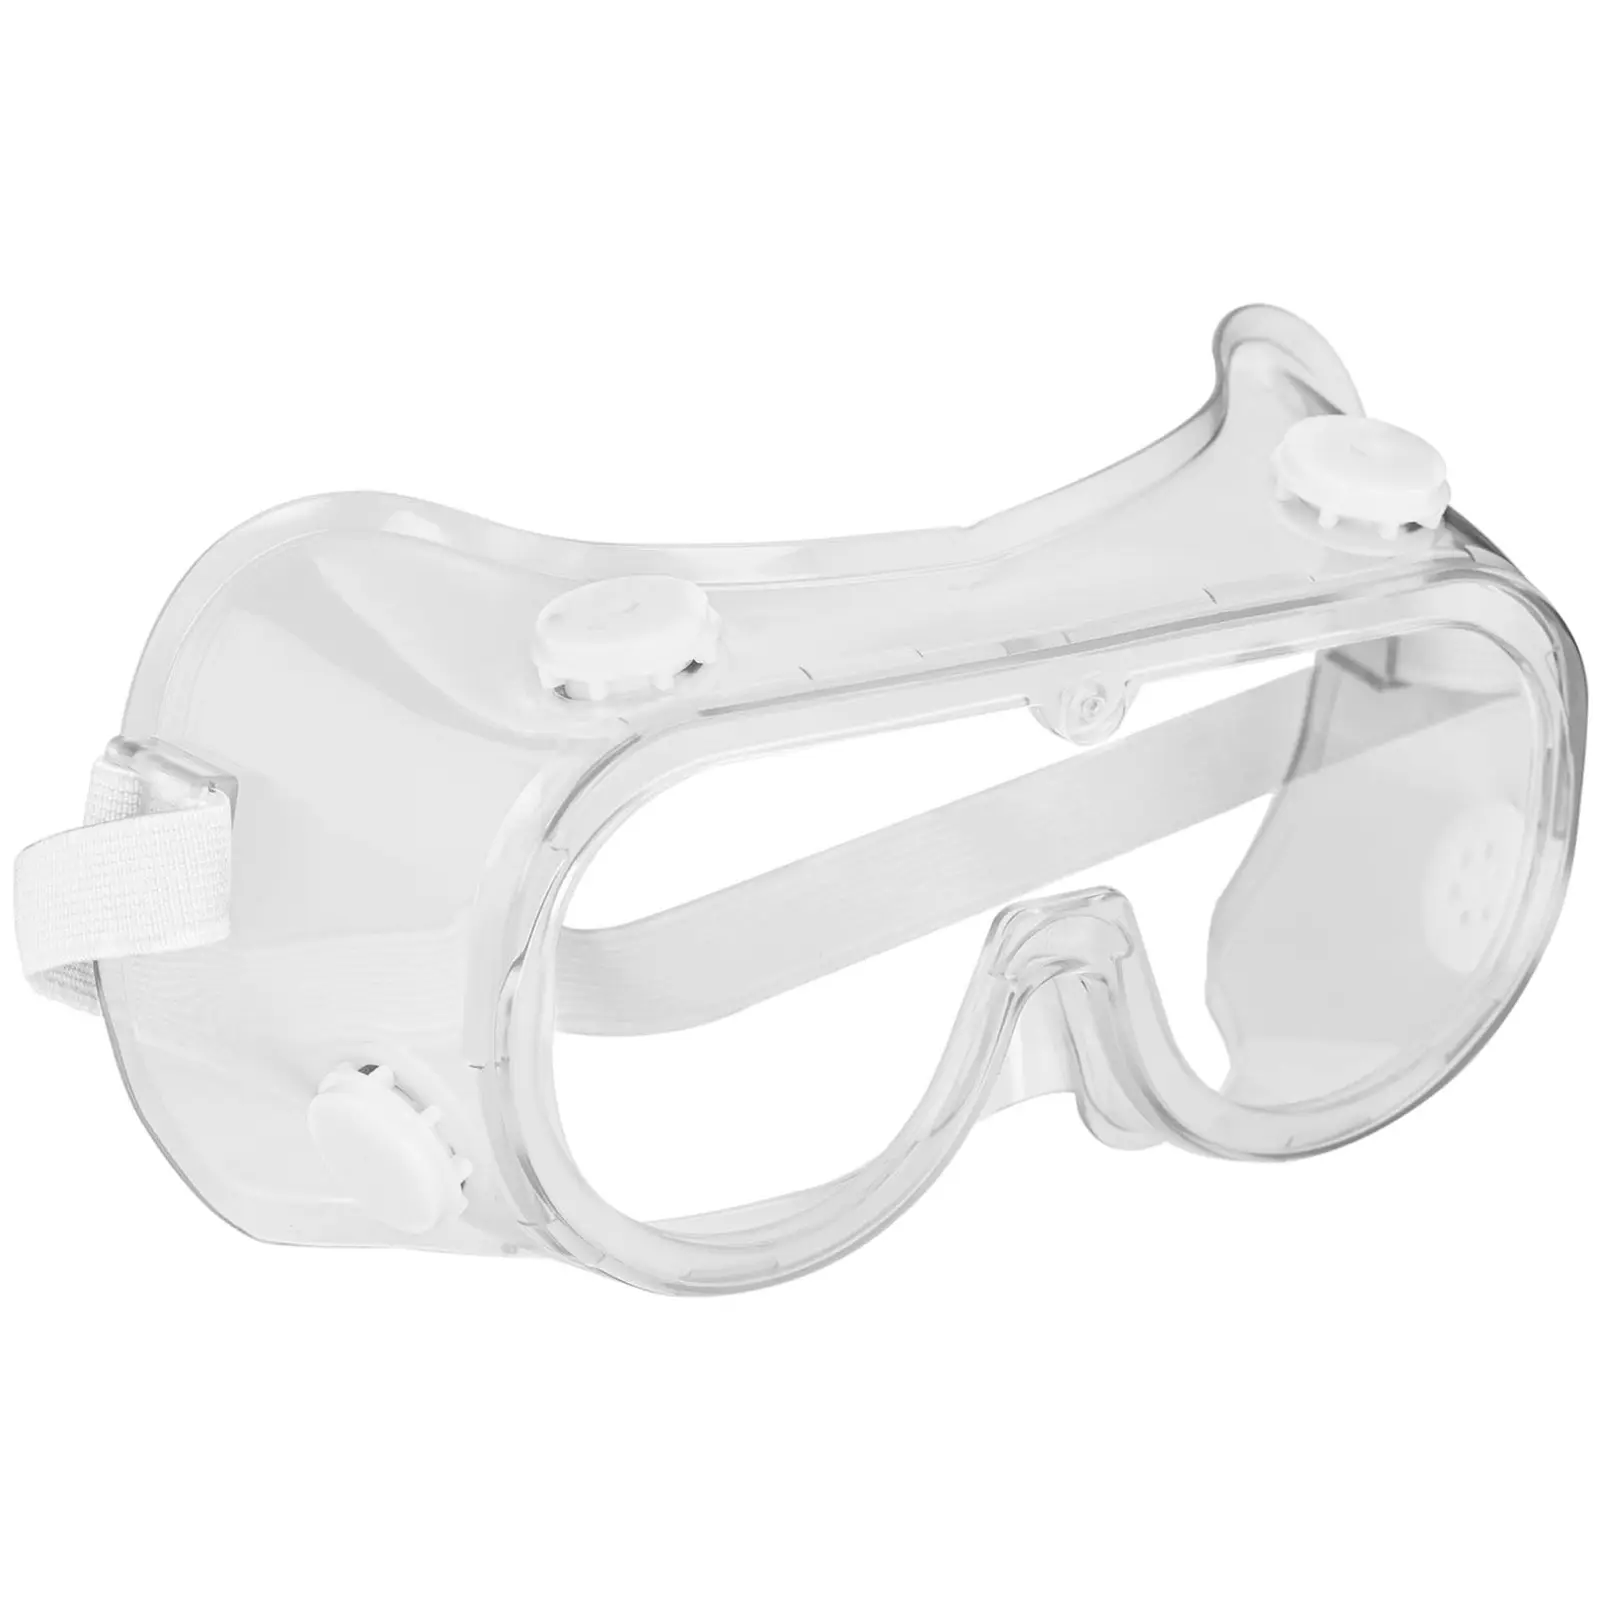 Safety Glasses - set of 3 - clear - one size